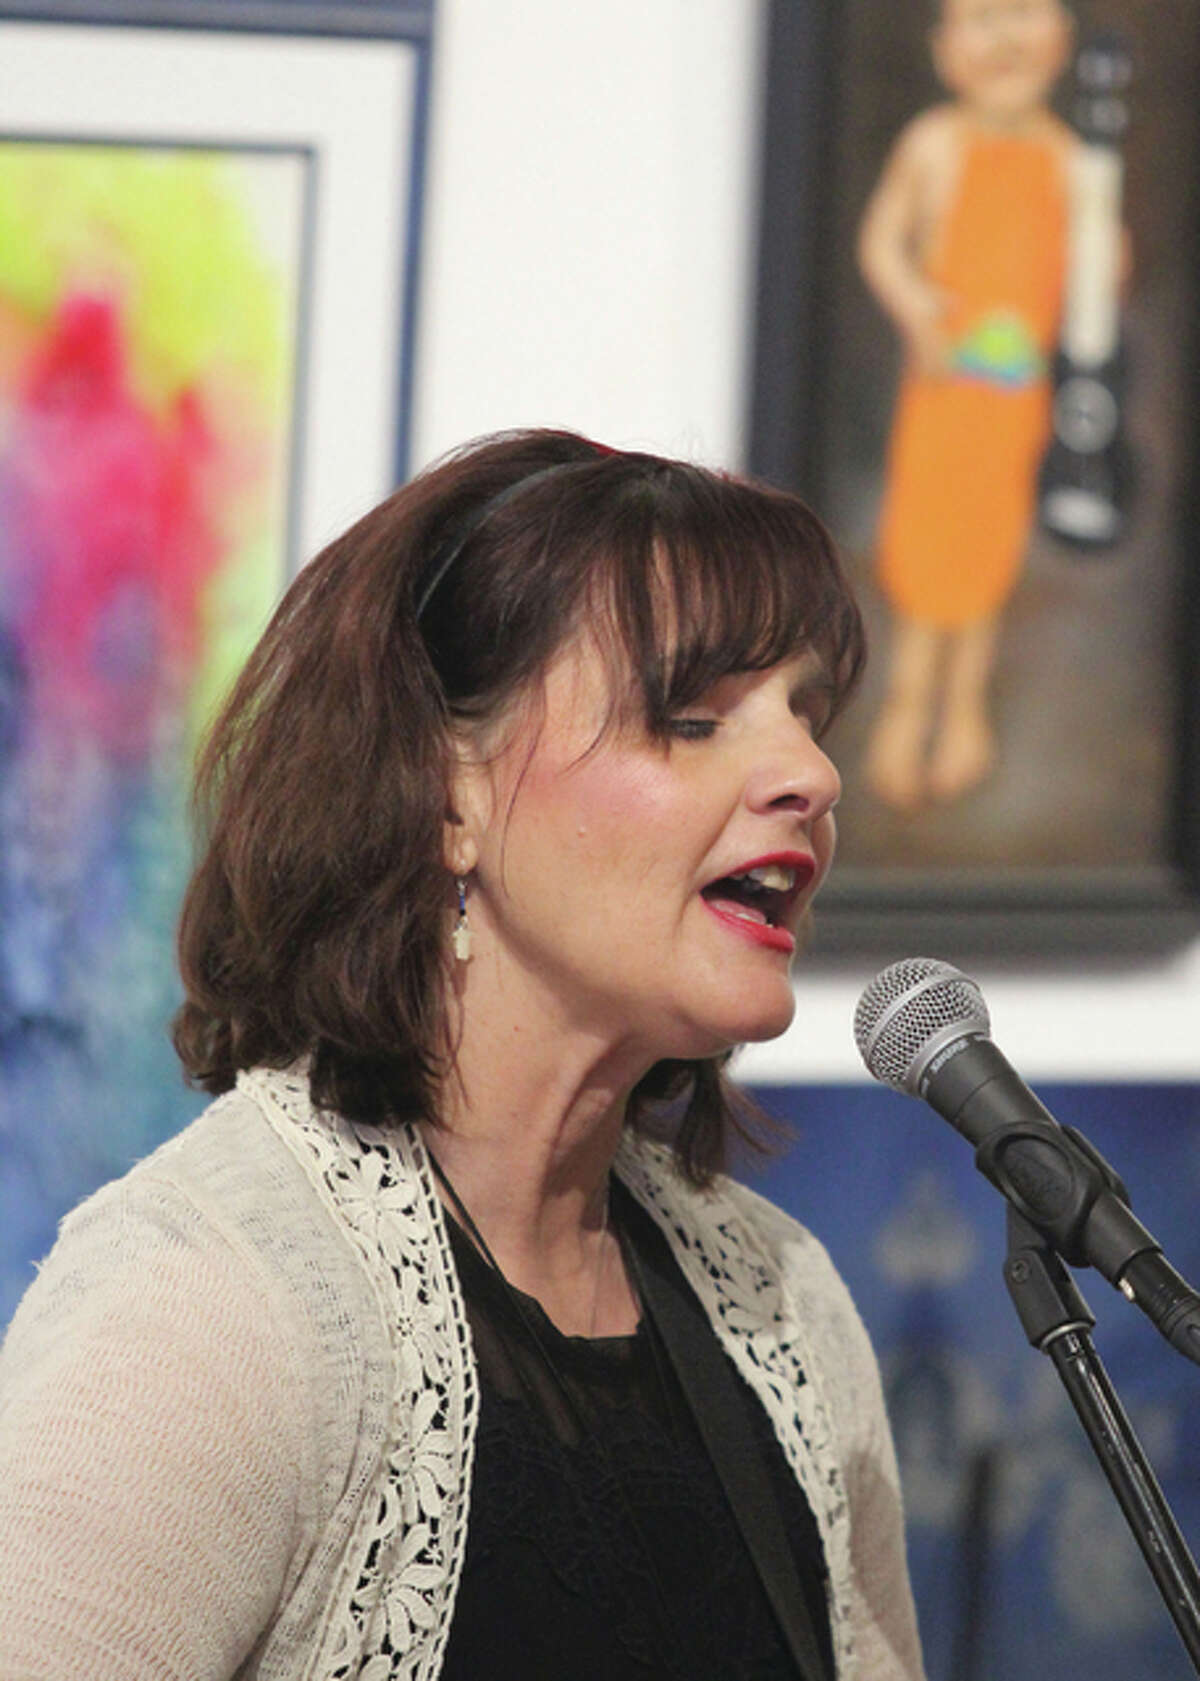 Framed by paintings from a recent juried art exhibit, Canadian-based singer Tia McGraff performs during a Valentine’s Day concert at the Jacoby Arts Center Sunday afternoon in Alton, where her husband and musical partner, Tommy Parham, has roots.